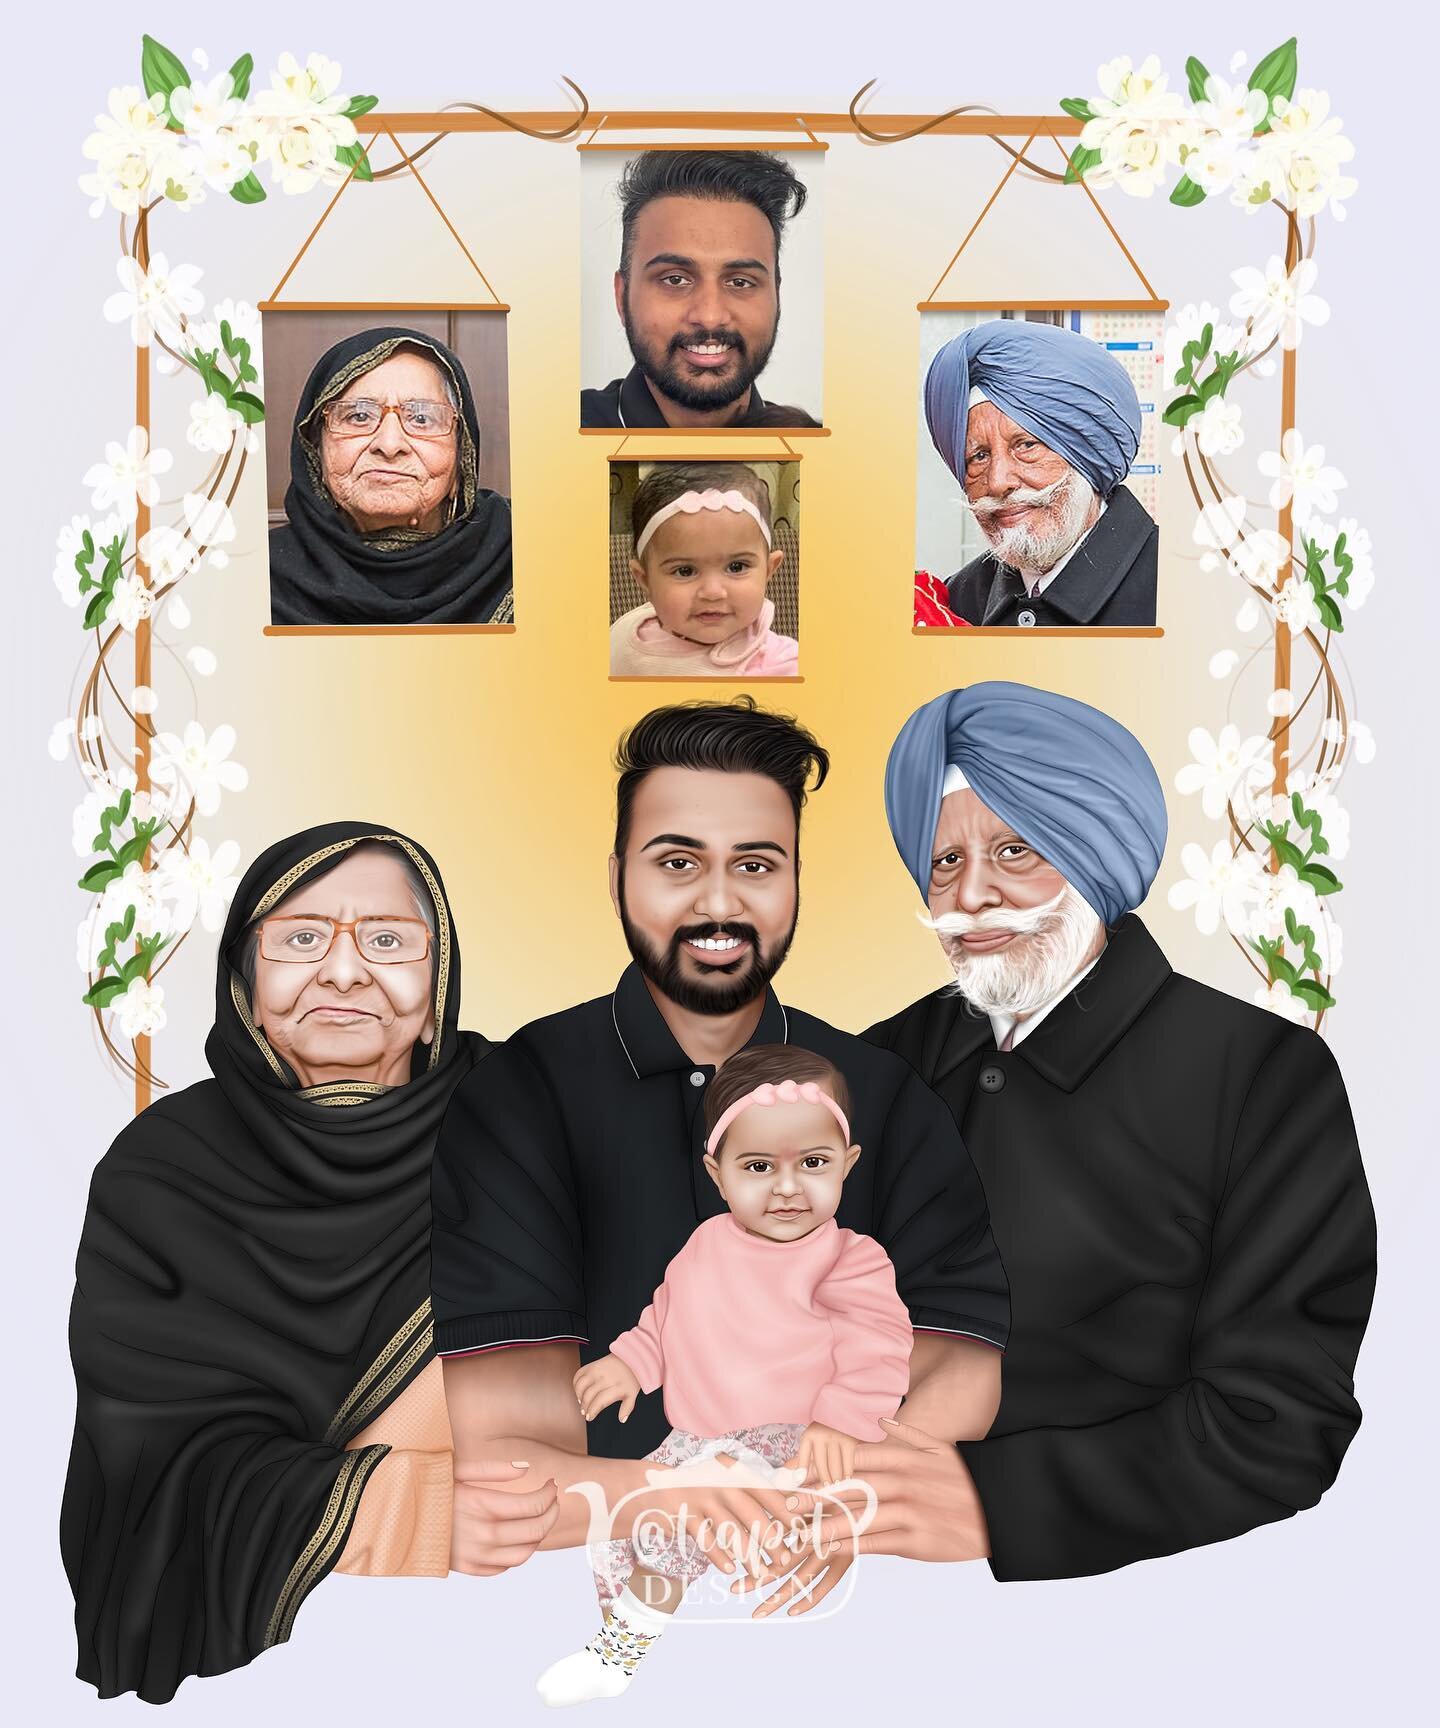 A complete family photo ❤️
Bringing together Ravit &amp; his two beloved grandparents who passed away before they could meet his beautiful little daughter. 

Ravit messaged me to bring together his family members from seperate photos, for he wanted t